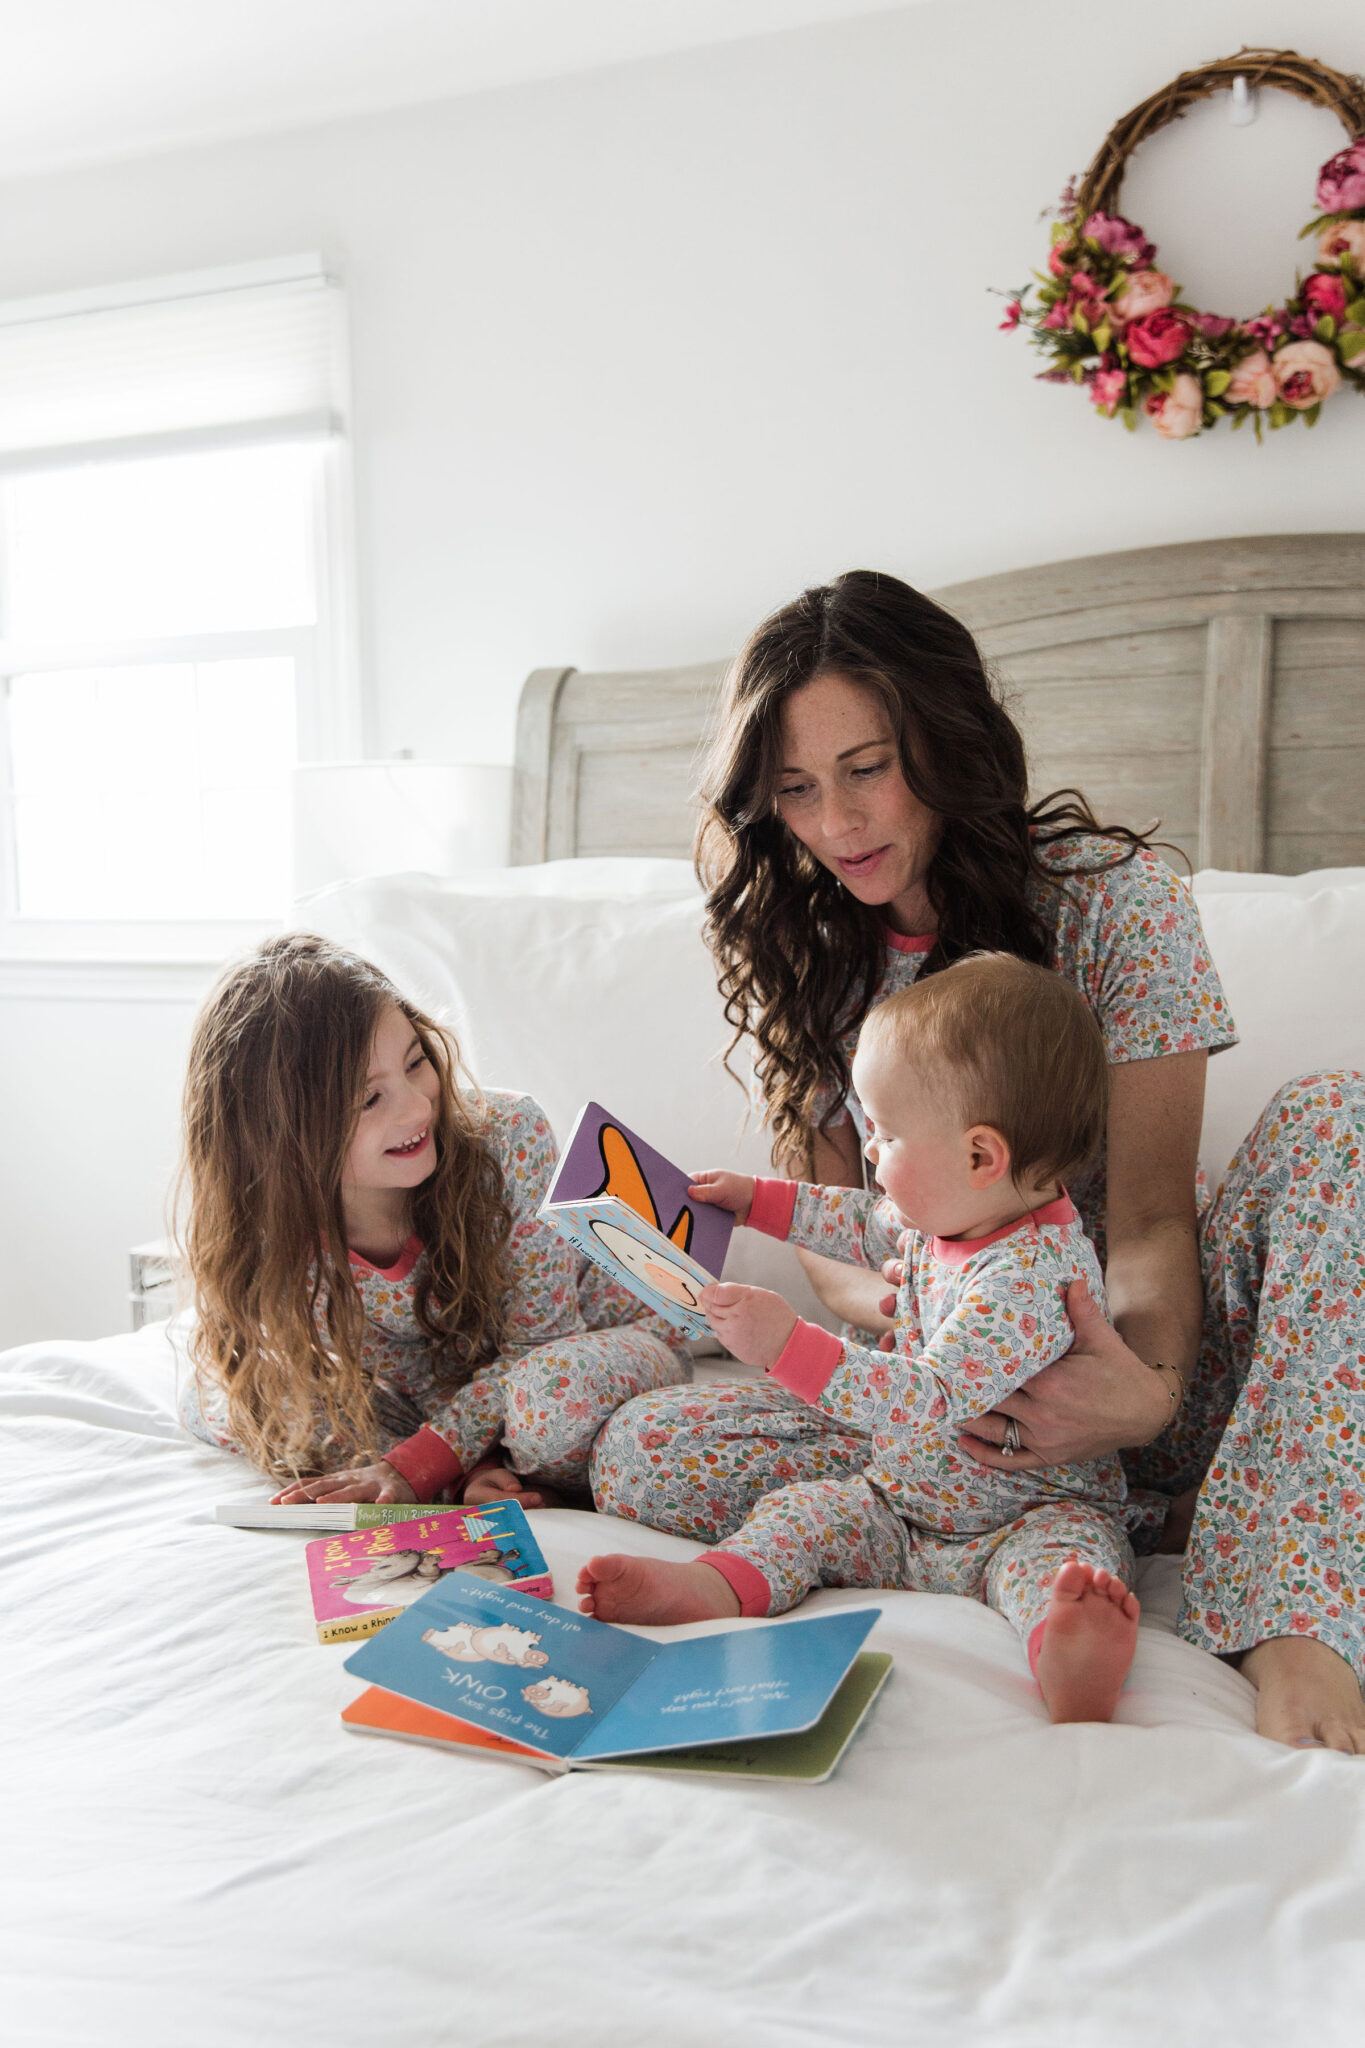 Mom and daughters in matching Lake pajamas reading books in bed